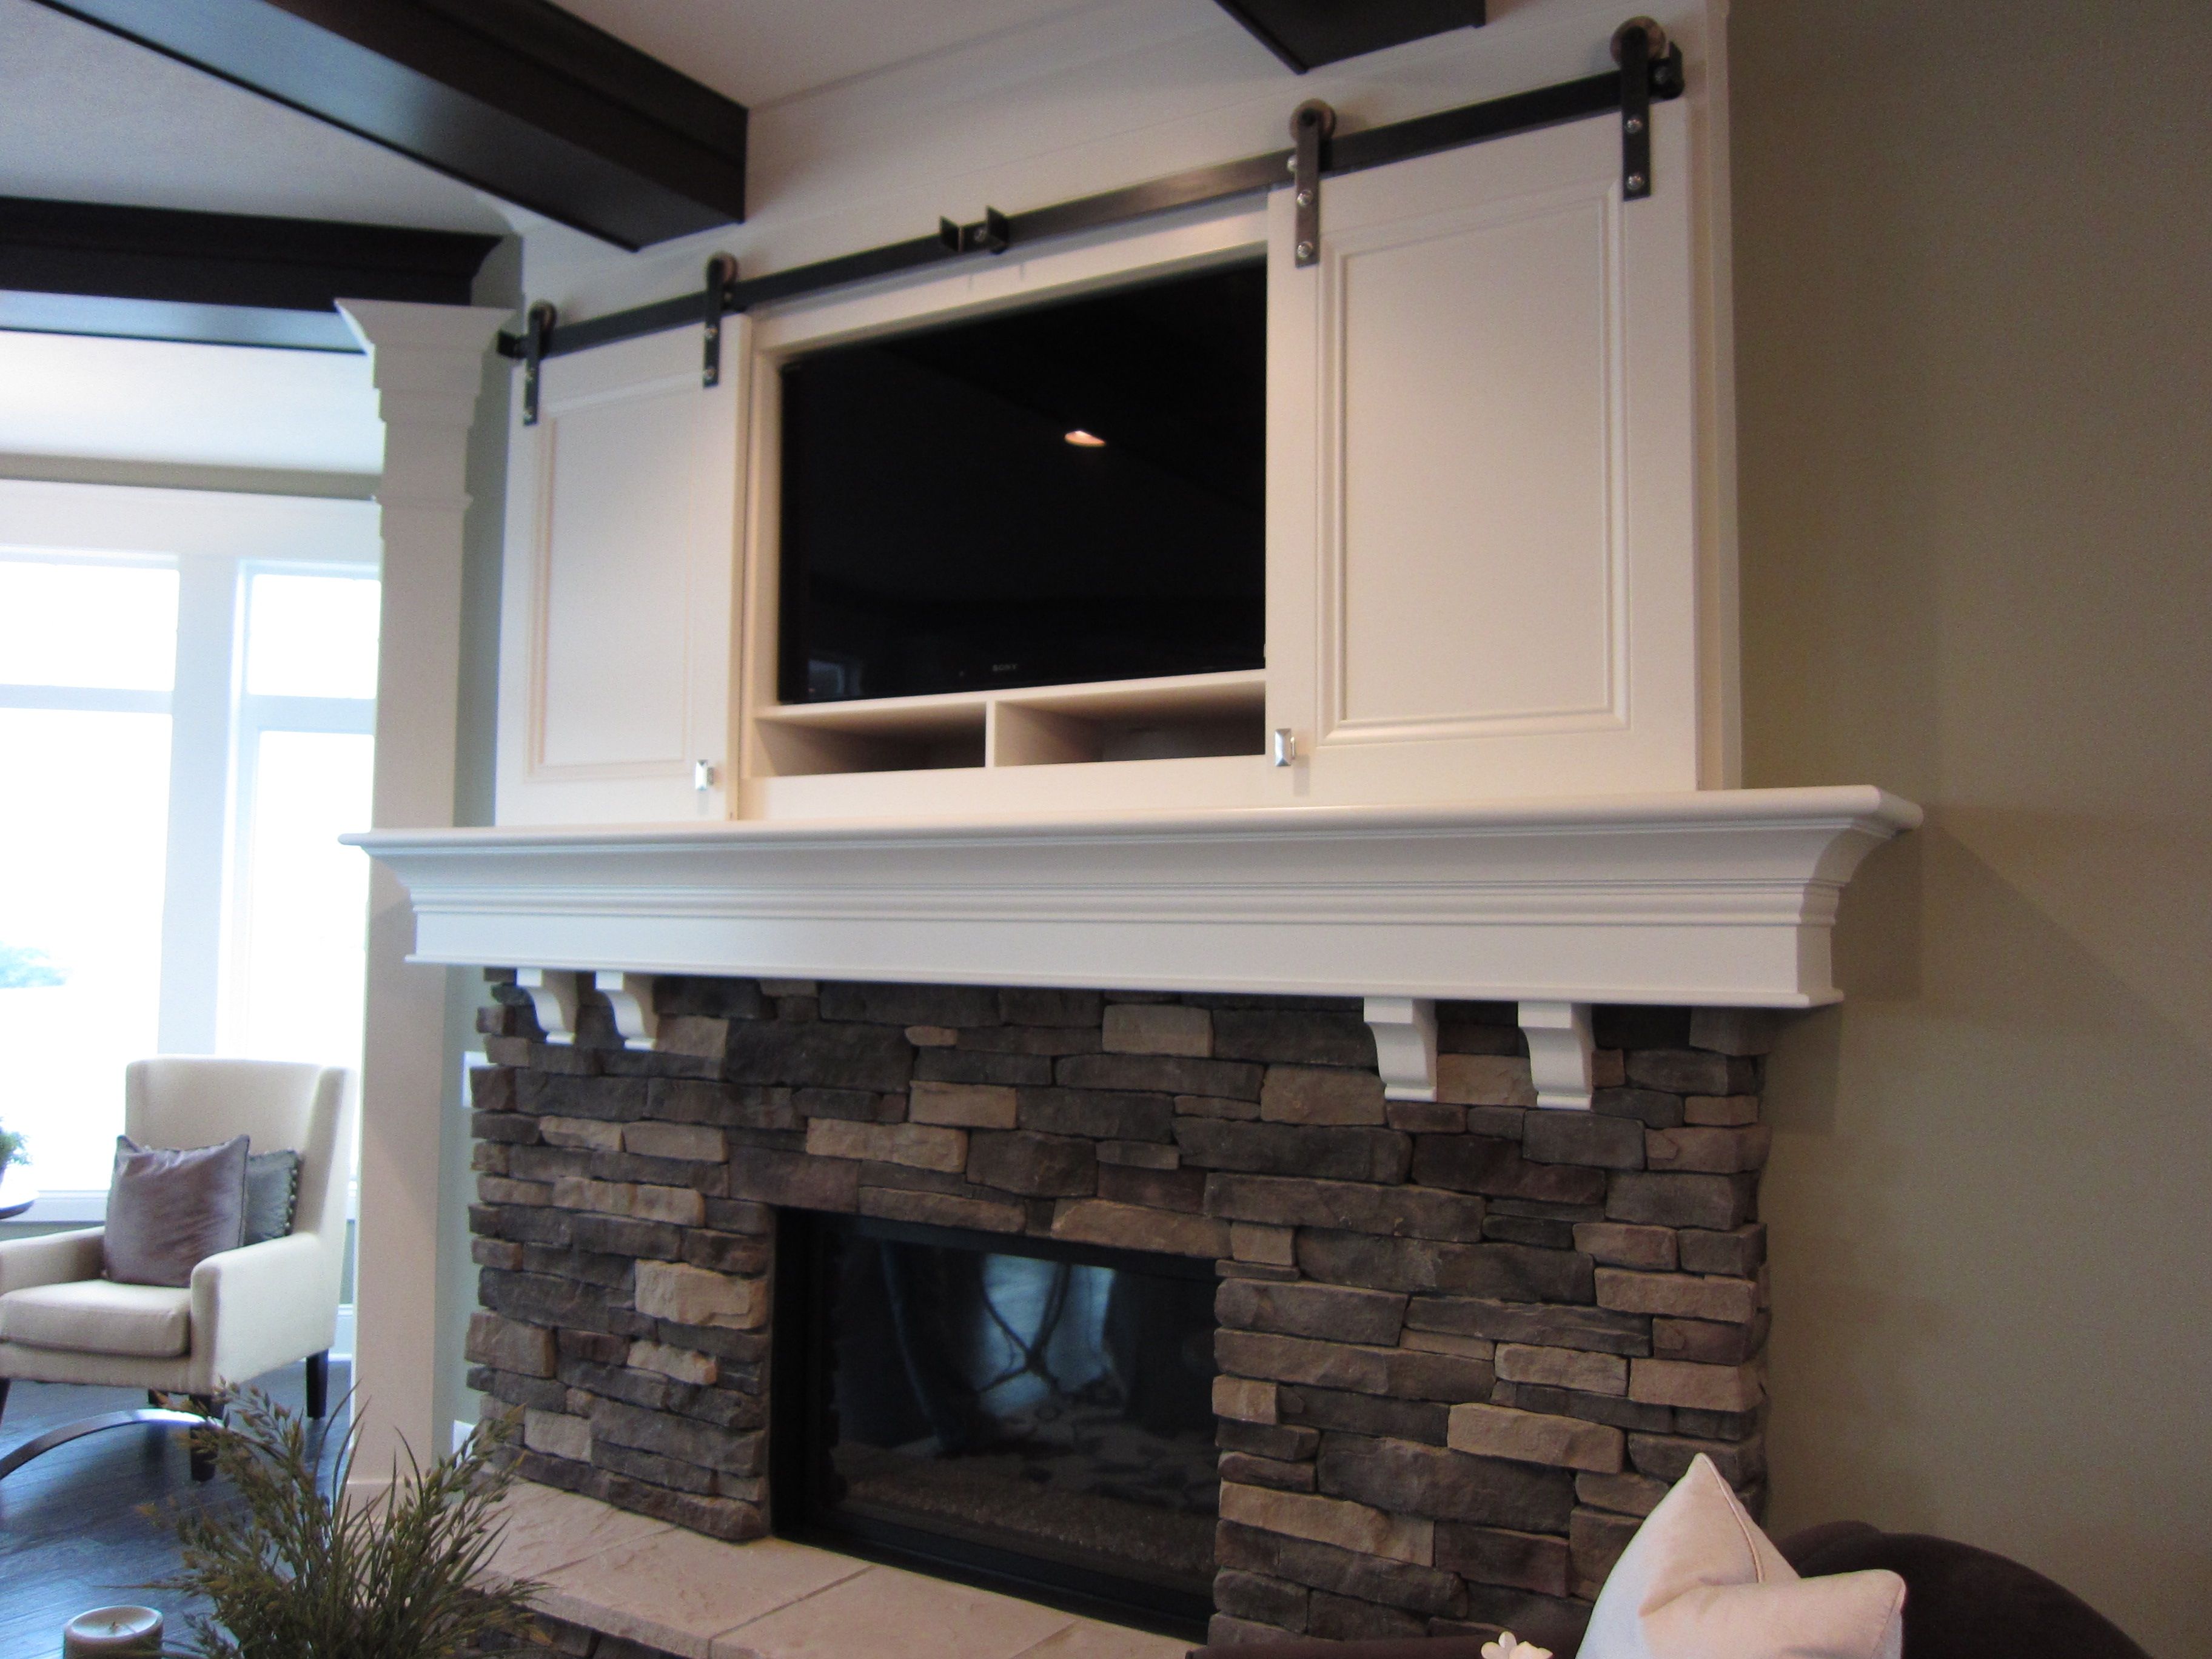 Where to Put Tv In Living Room with Fireplace Best Of Fireplace Tv Mantel Ideas Best 25 Tv Above Fireplace Ideas